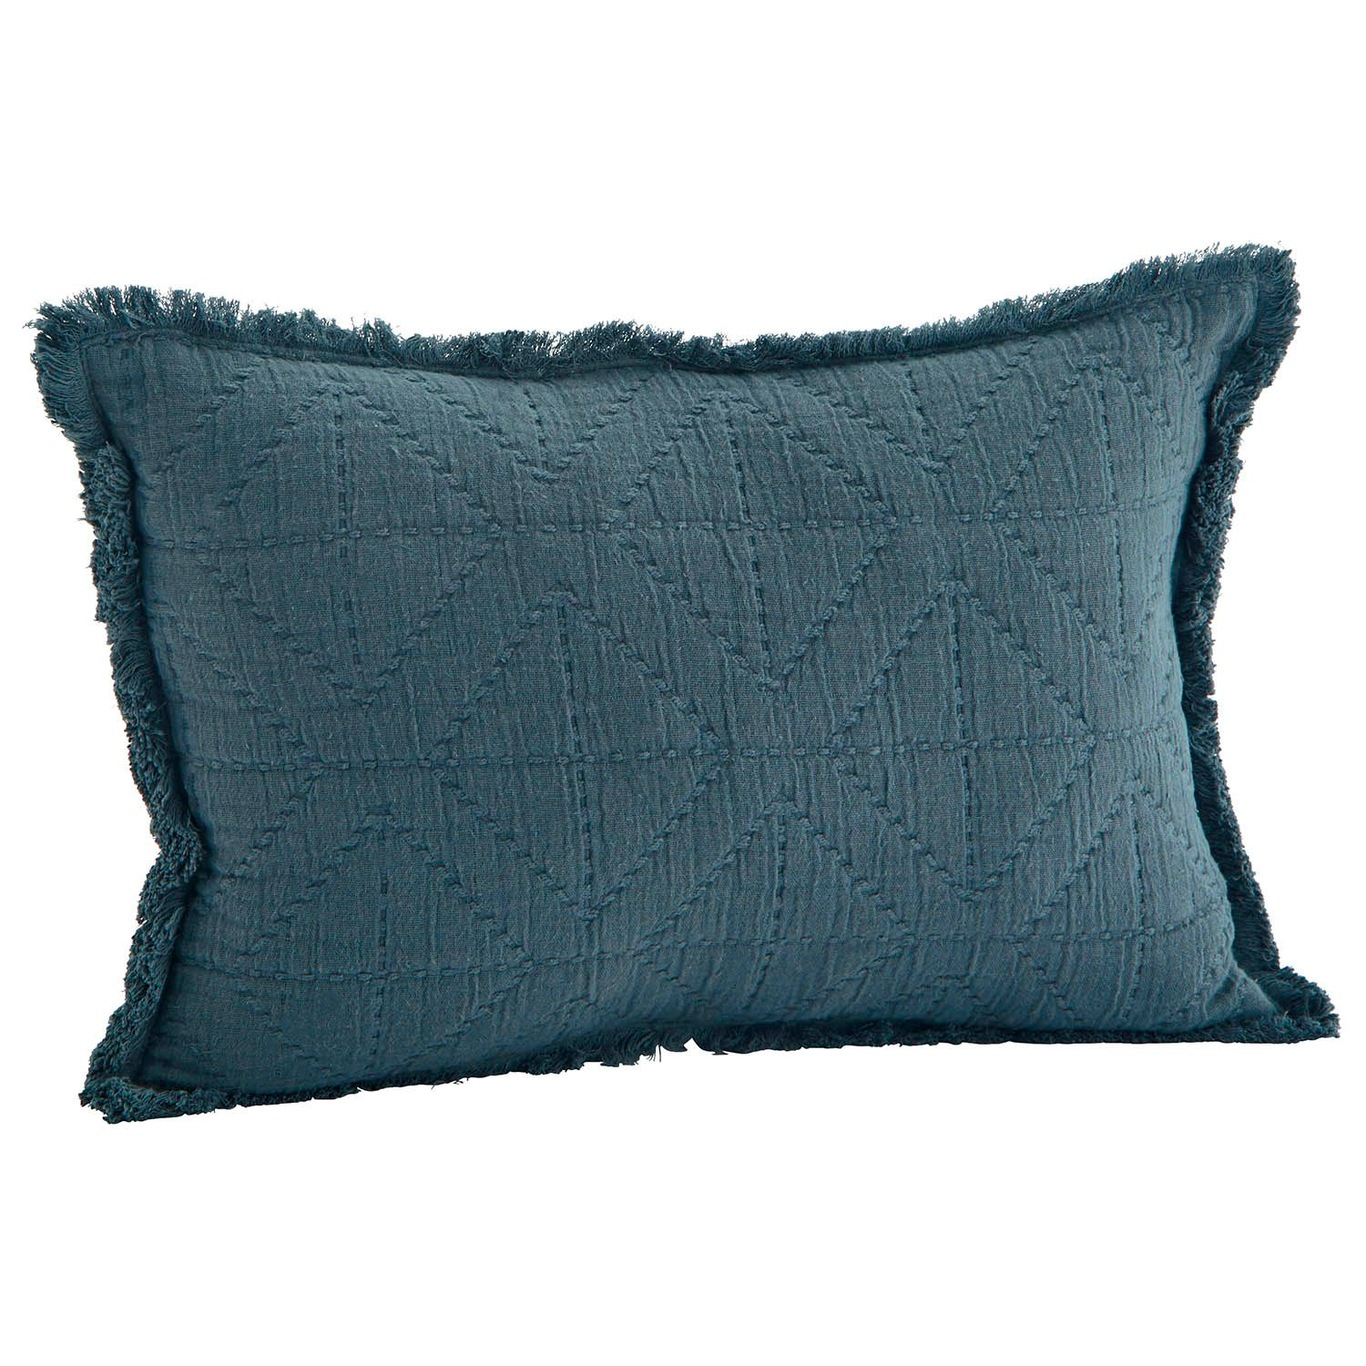 Embroidered Cushion Cover 30x45 cm, Dusty Blue